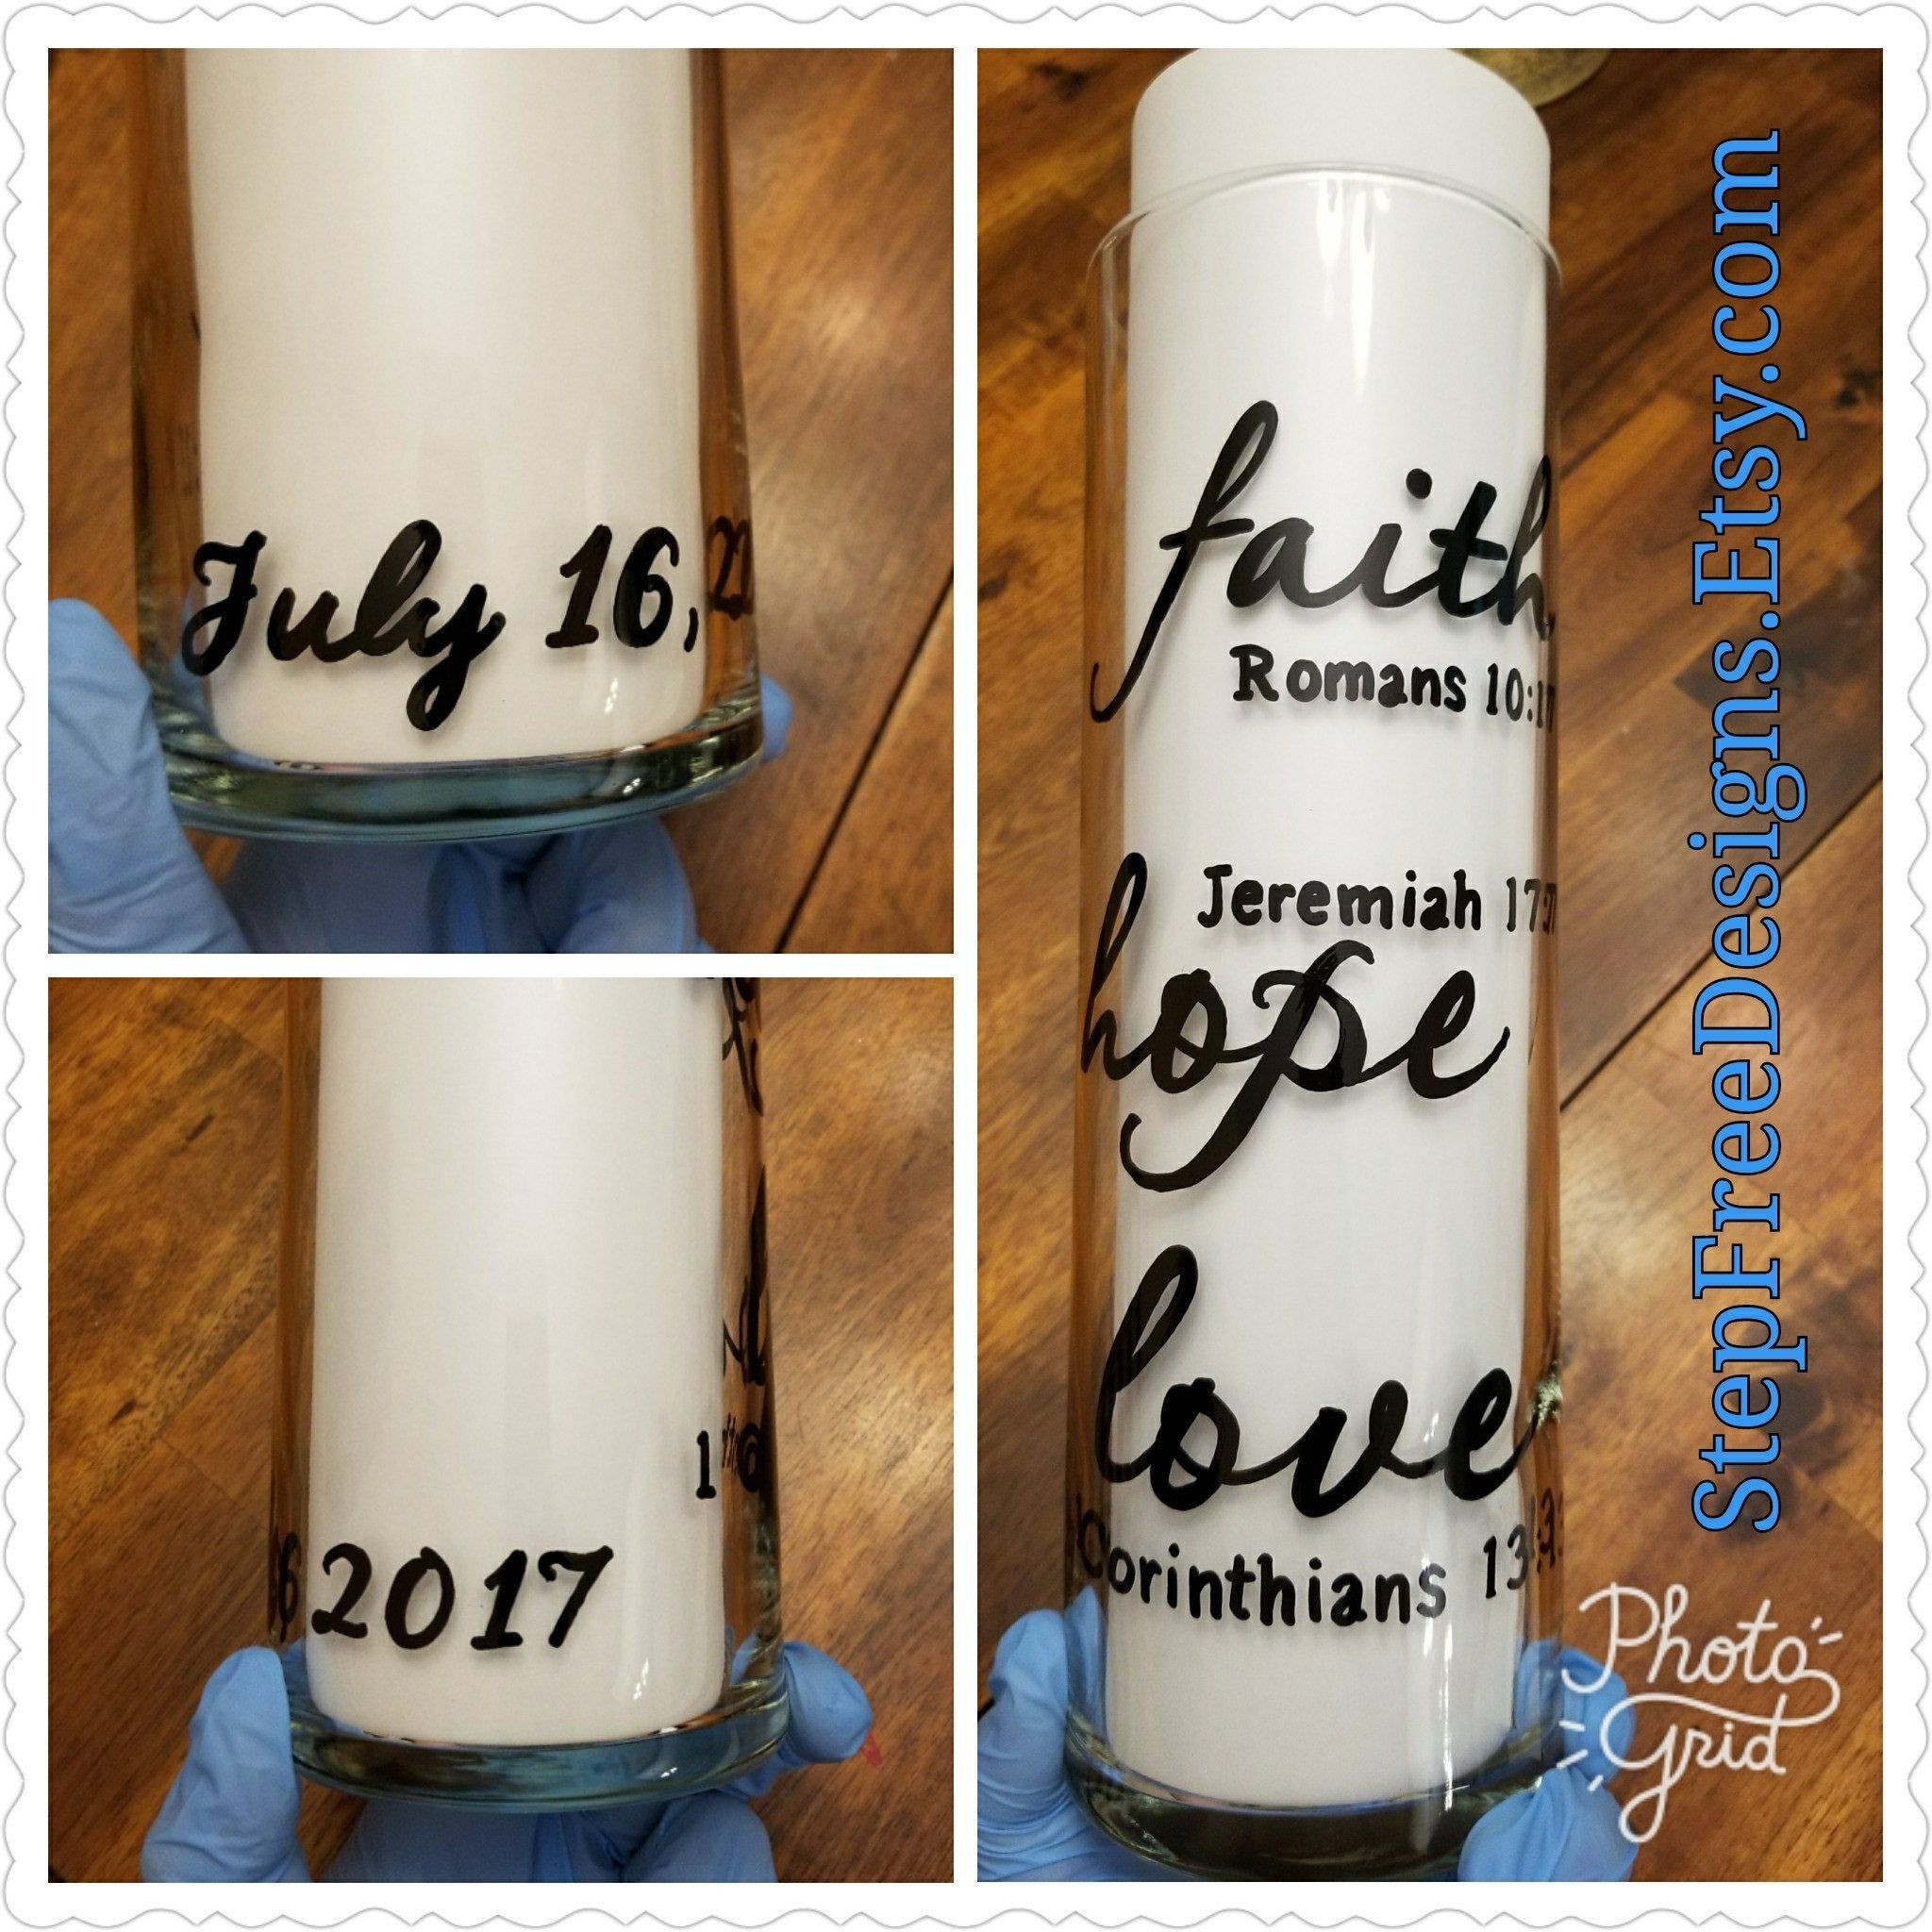 Custom Flower Vase Of This Pretty Flower Vase is Customized with the Brides Wedding Date with Regard to This Pretty Flower Vase is Customized with the Brides Wedding Date New Christian Wedding Gifts Christian